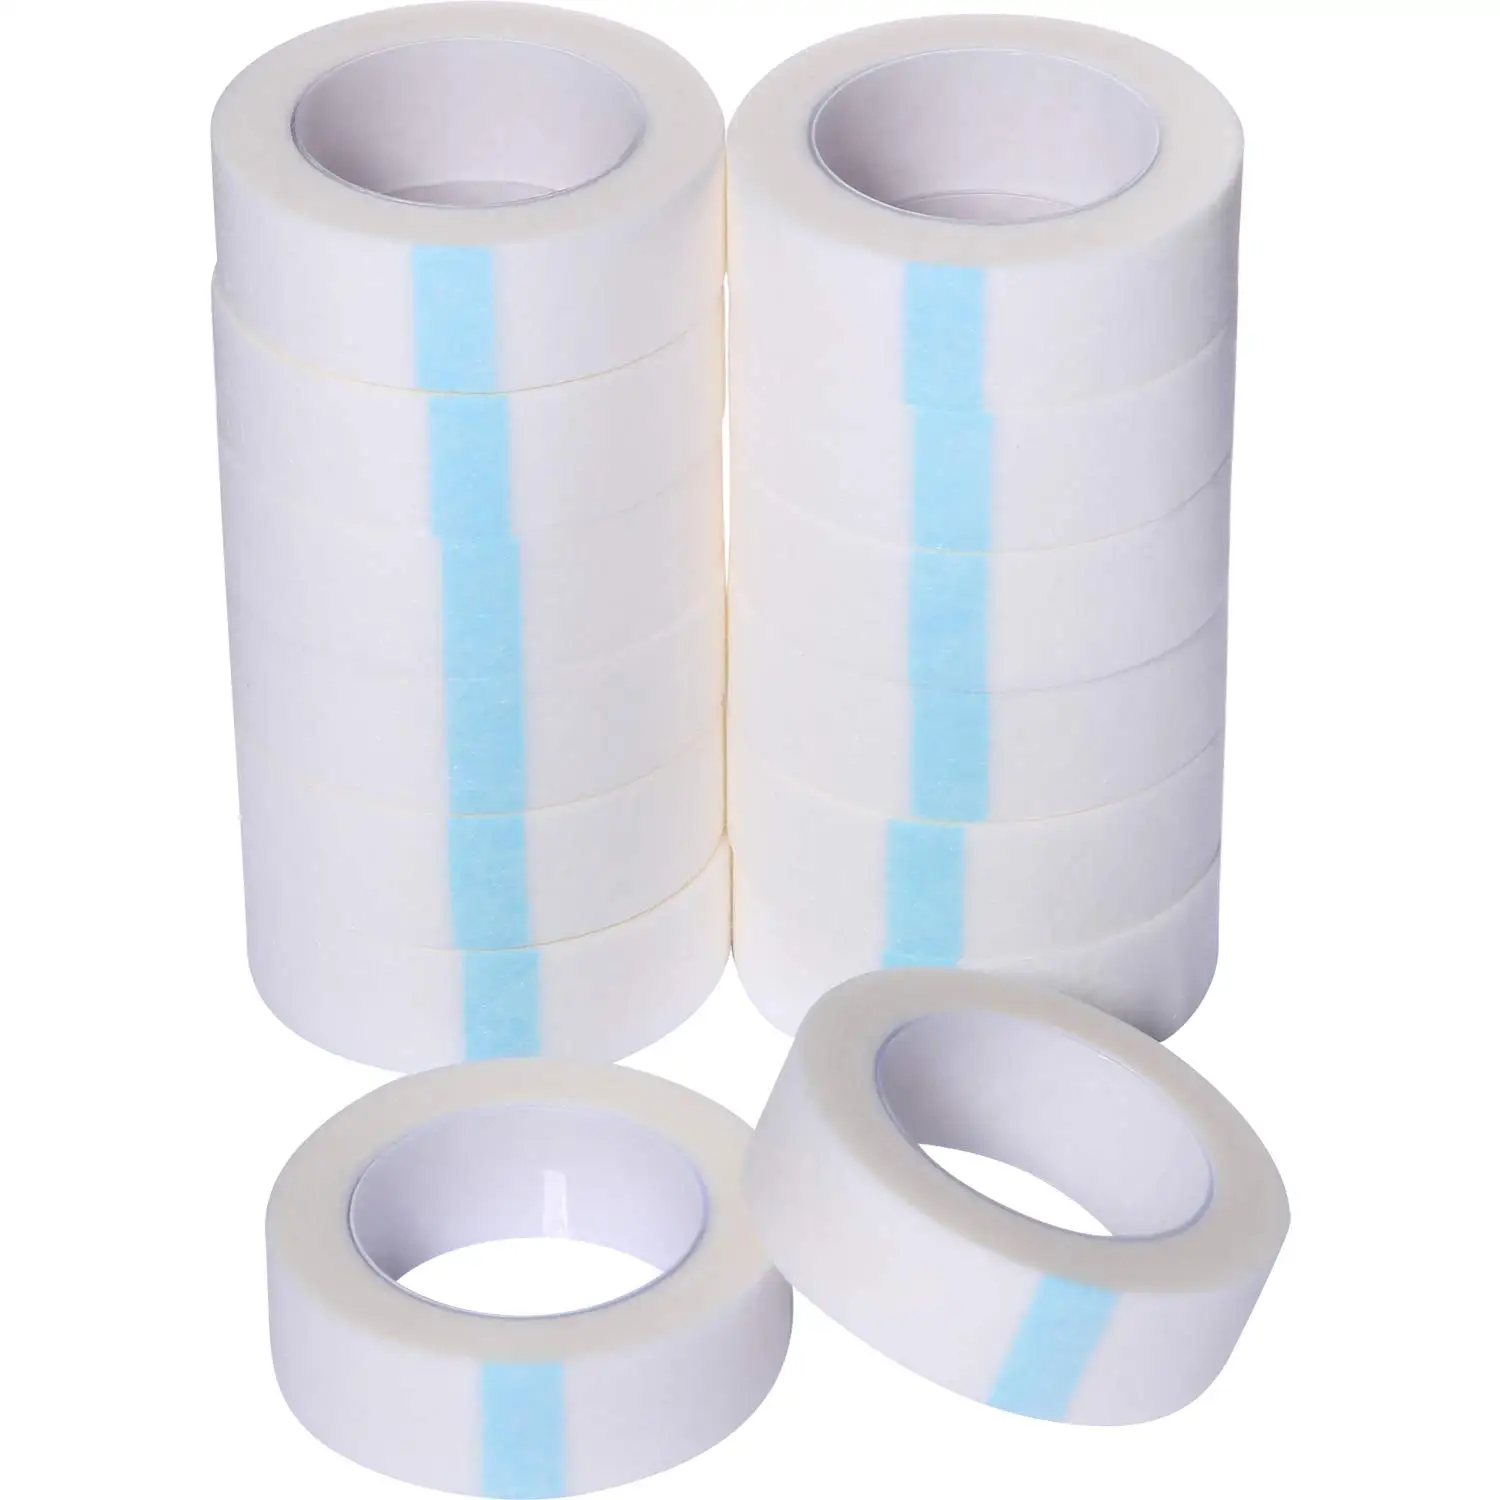 

Lower Price Skin-Friendly Eyelash Extension Tape Beauty Tape Eyelash Extension Fabric Lash Tape Wholesale, As the picture